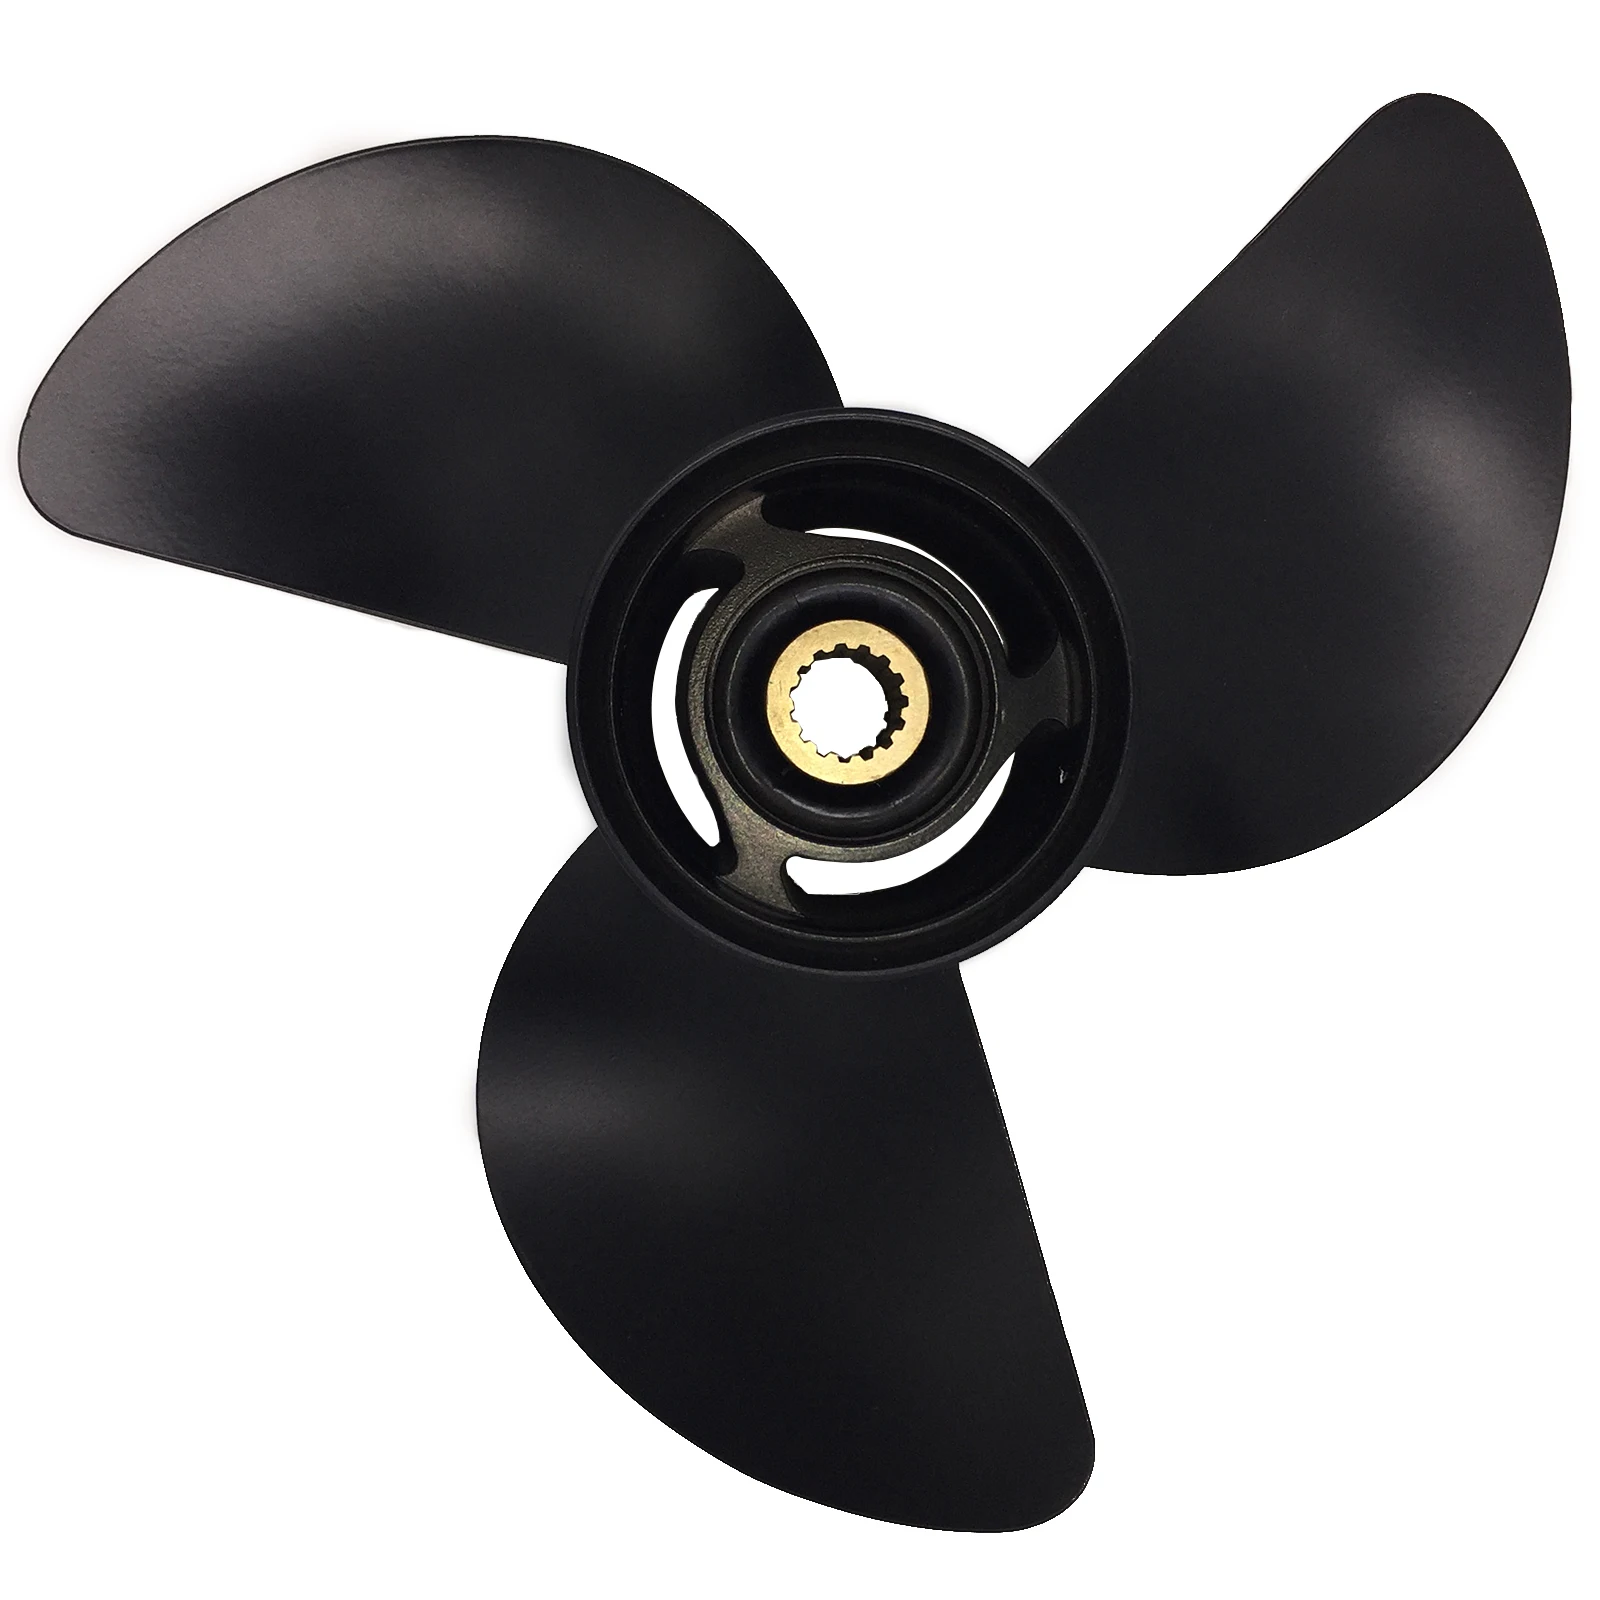 Boat Propeller 13 3/4x13 for Tohatsu 60HP-125HP 3 Blades Aluminum 15 Tooth RH OEM NO: 3HKB64527-0 13.75x13